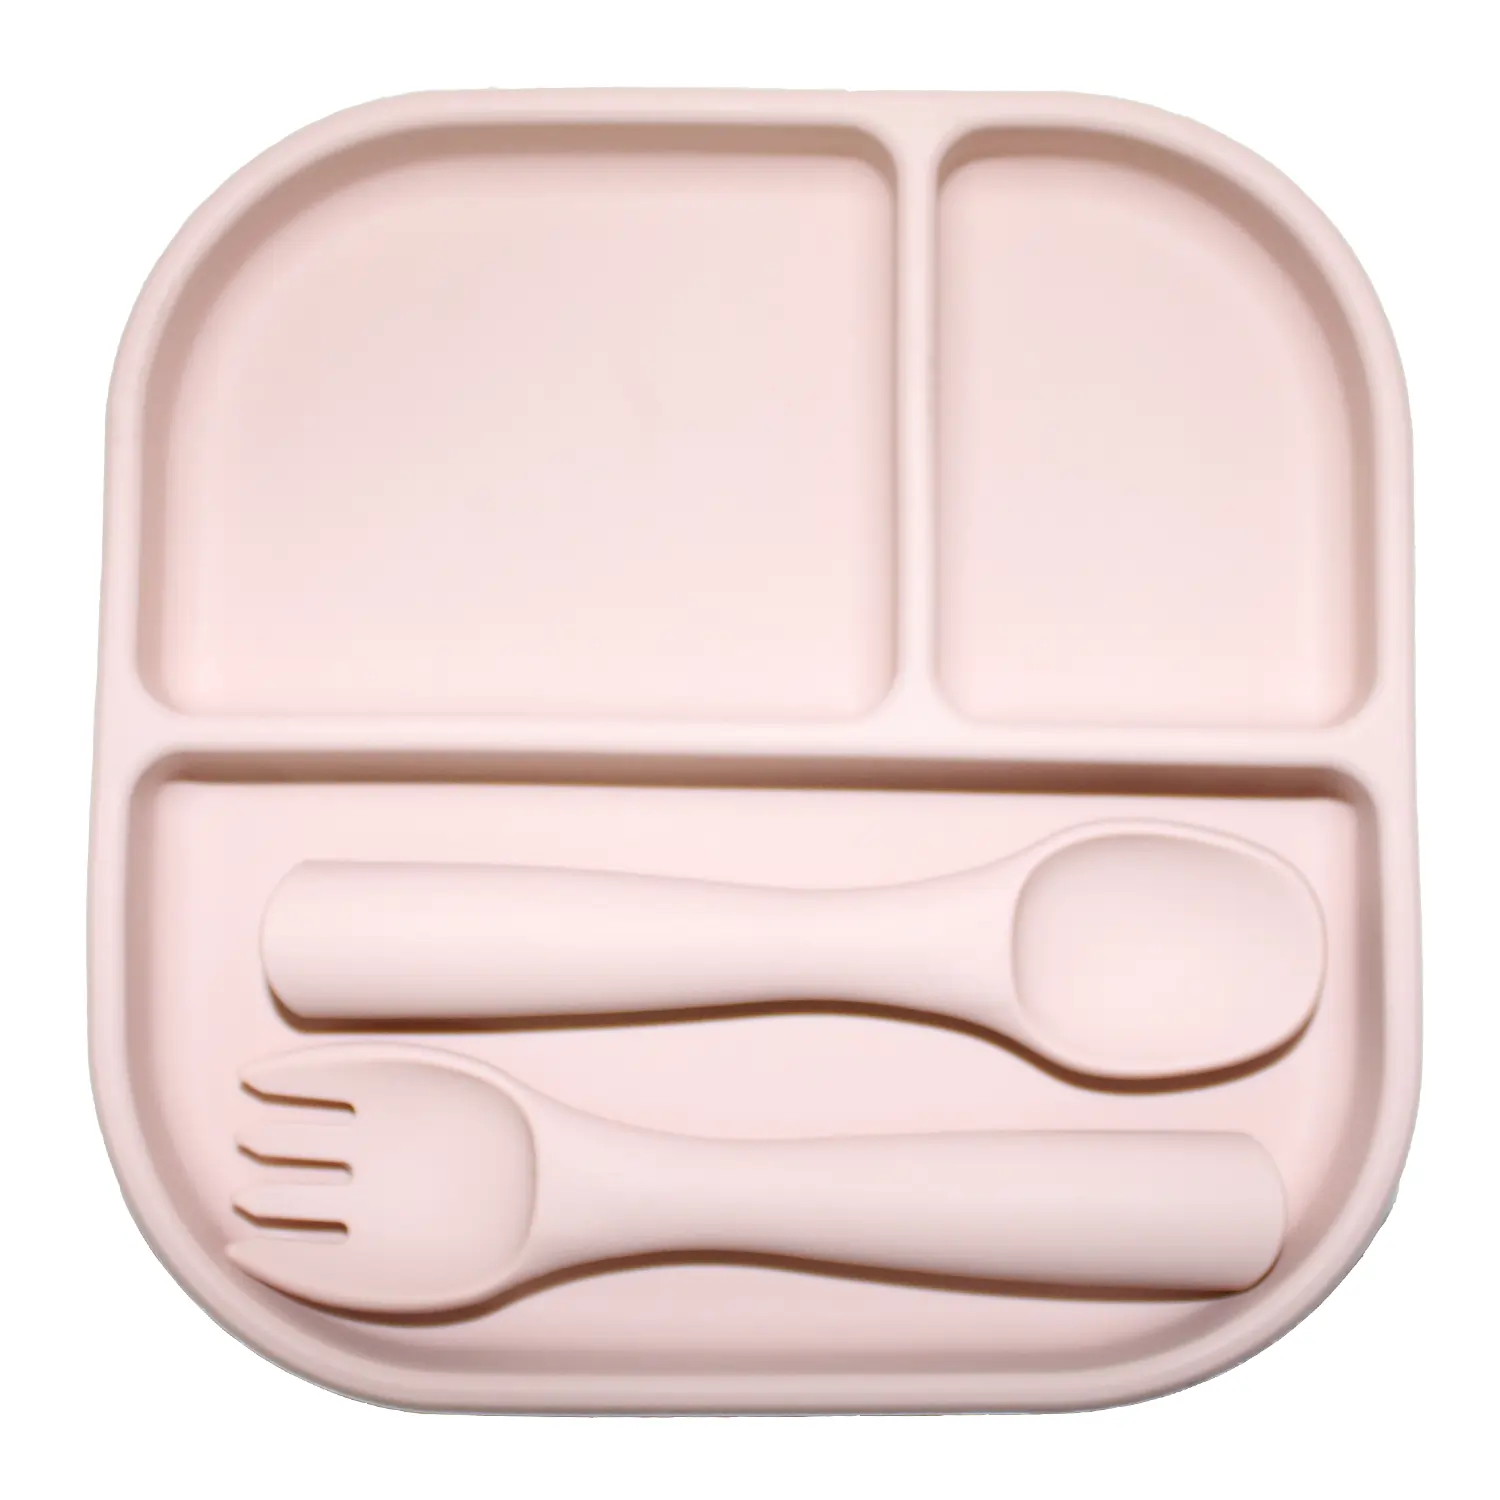 Pink Silicone Square Plate Set